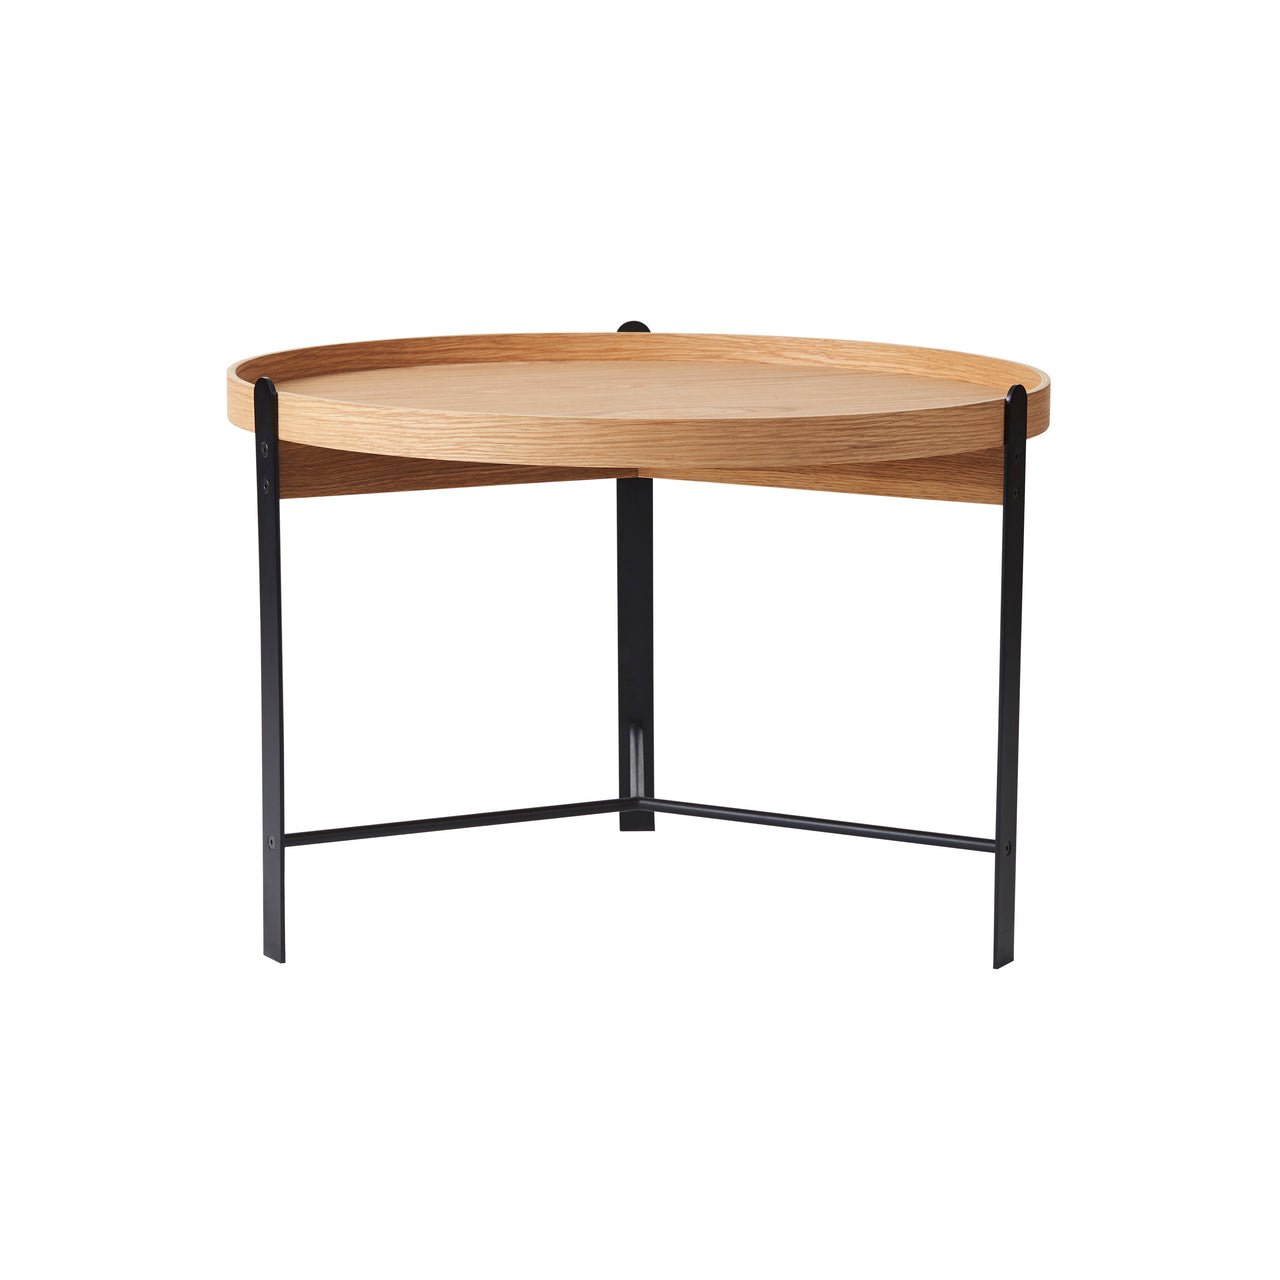 Compose Coffee Table: Large - 27.6